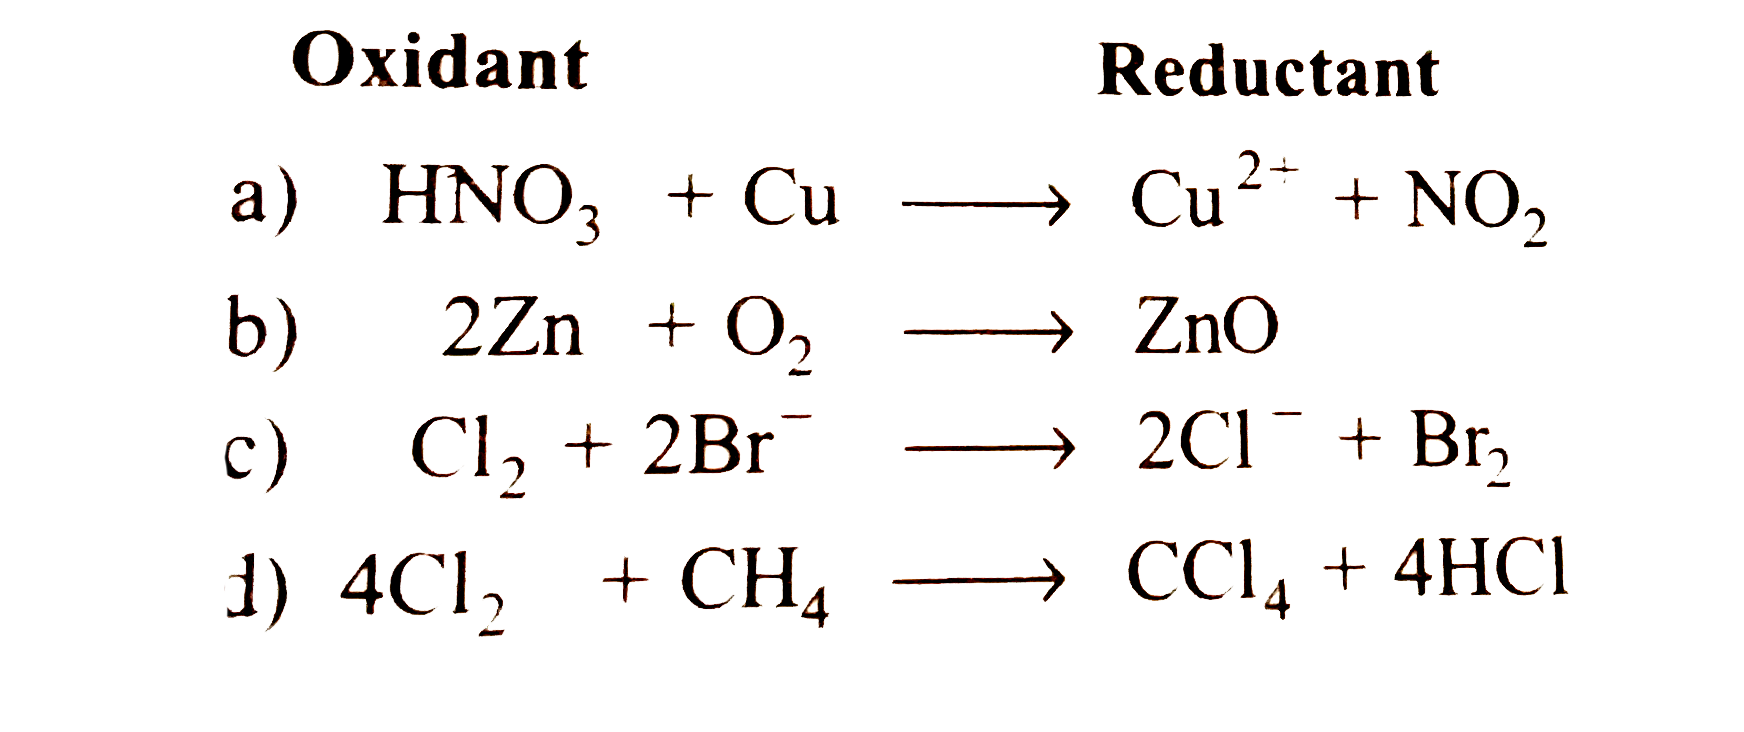 Oxidation and reduction process involves the transaction of electrons. Loss of electrons is oxidation and the gain of electrons is reduction. It is thus obvious that in a redox reaction, the oxidant is reduced by accepting the electrons and the reductant is oxidised by losing electrons. The reactions in which a species disproportionates into two oxidation states (lower and higher) are called disproportionation reactions. In electrochemical cells, redox reaction is involved, i.e., oxidation takes place at anode and reduction at cathode.   Which of the following reactions is/are correctly indicated?